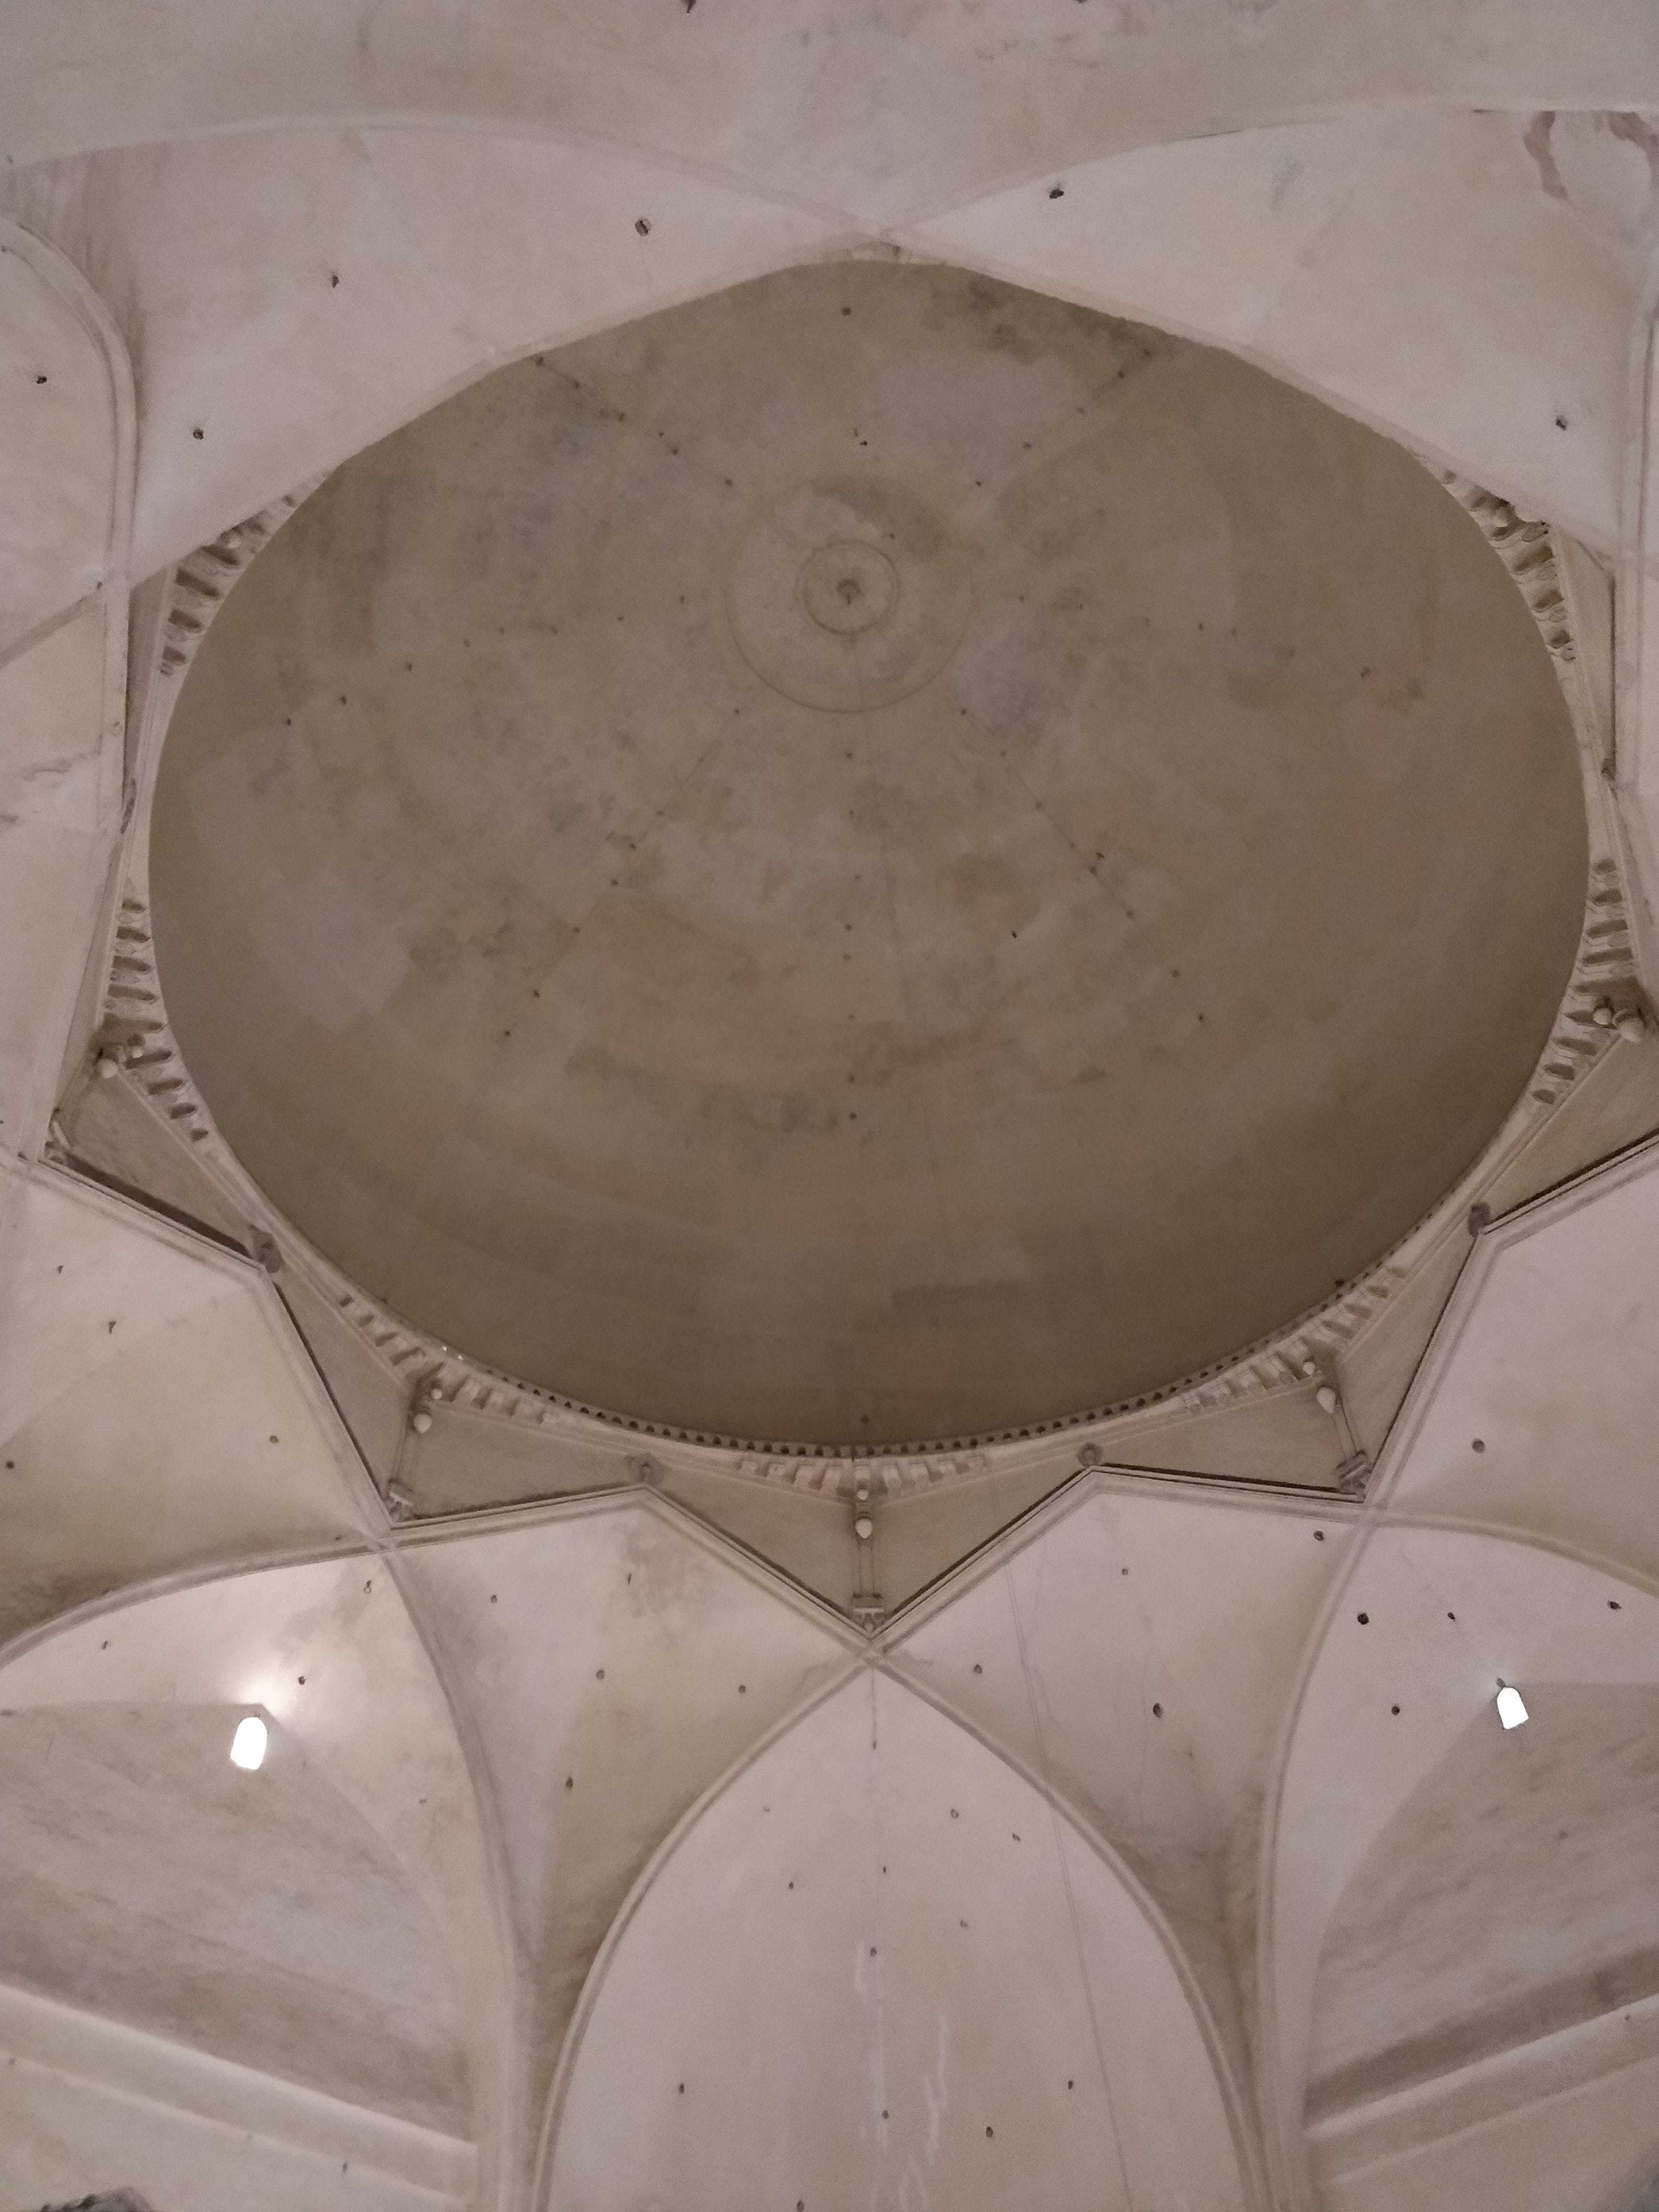 dome as seen from the lower level